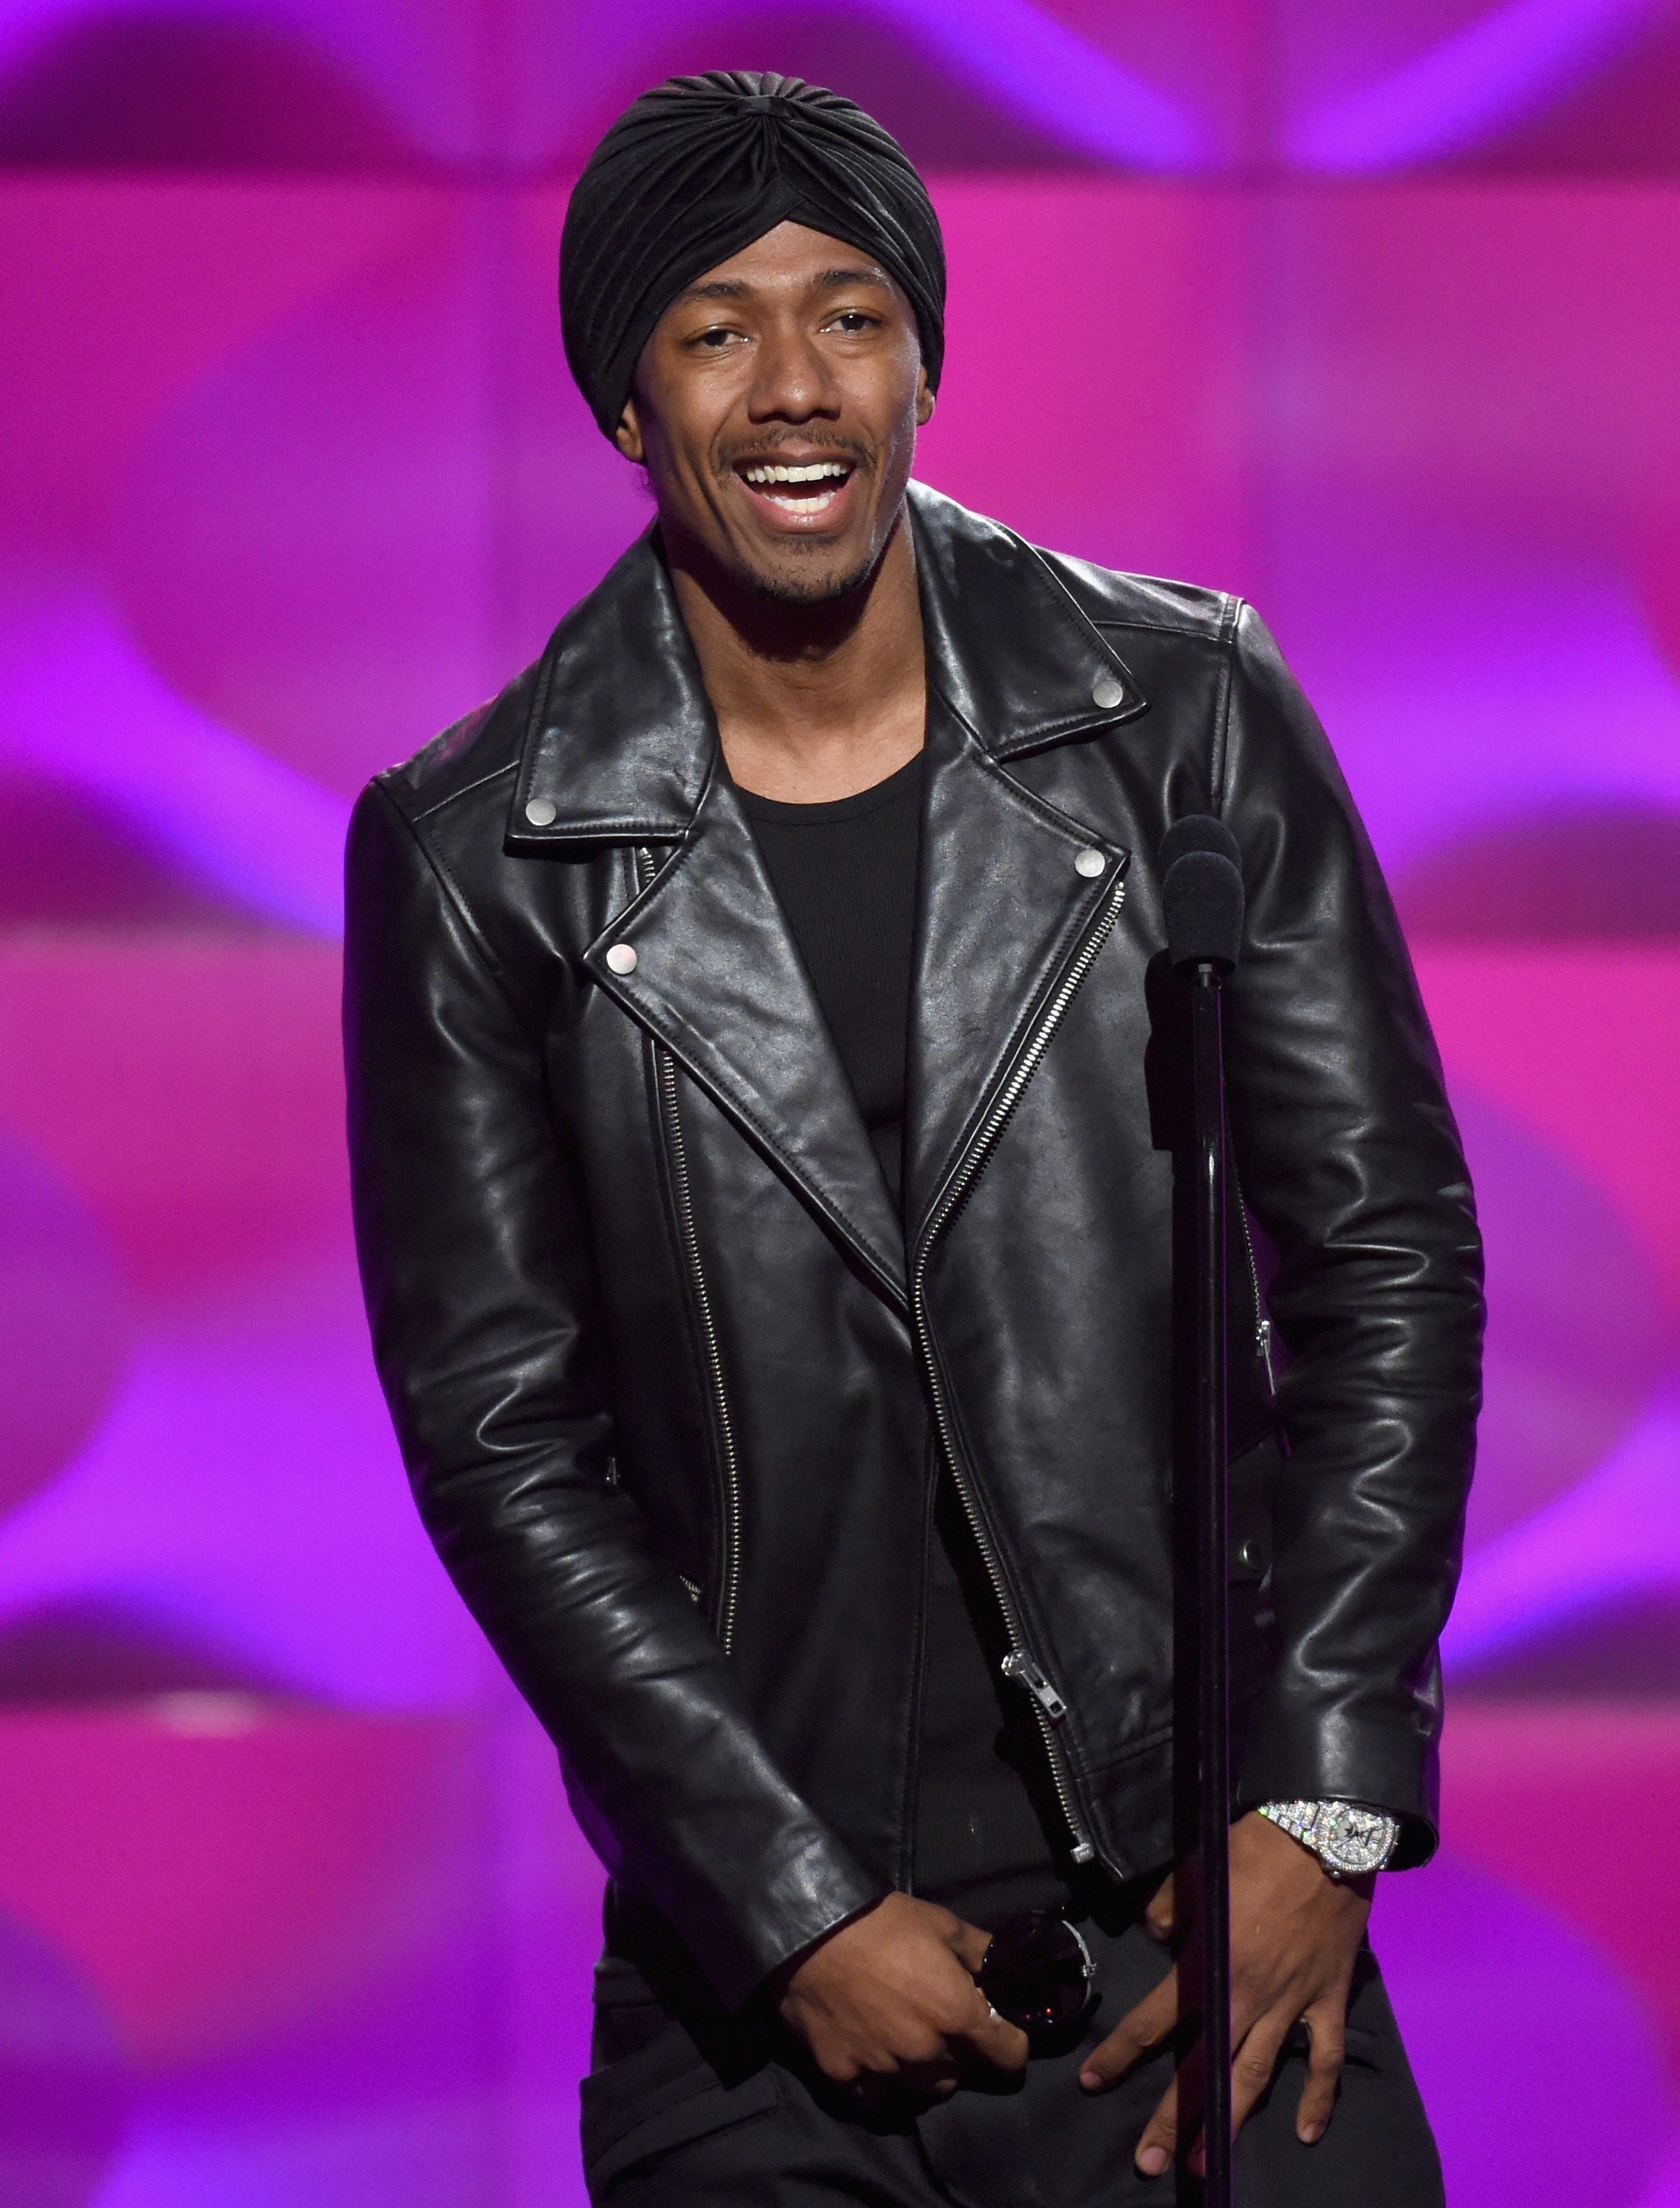 Nick Cannon on stage at the 2017 Billboard Women in Music event in November 2017. | Photo: Getty Images 